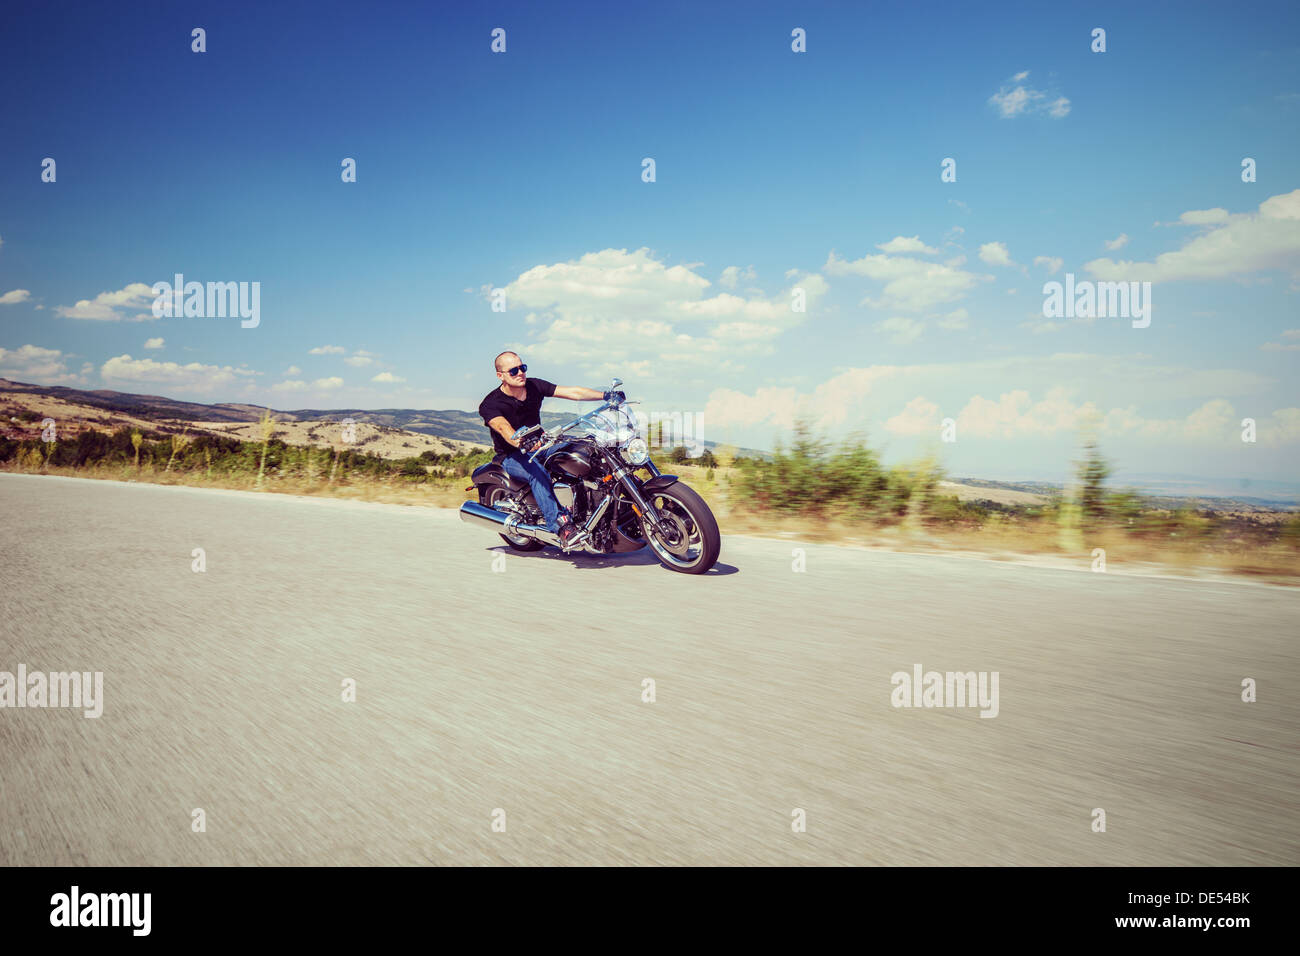 Young biker riding a customized motorcycle Stock Photo